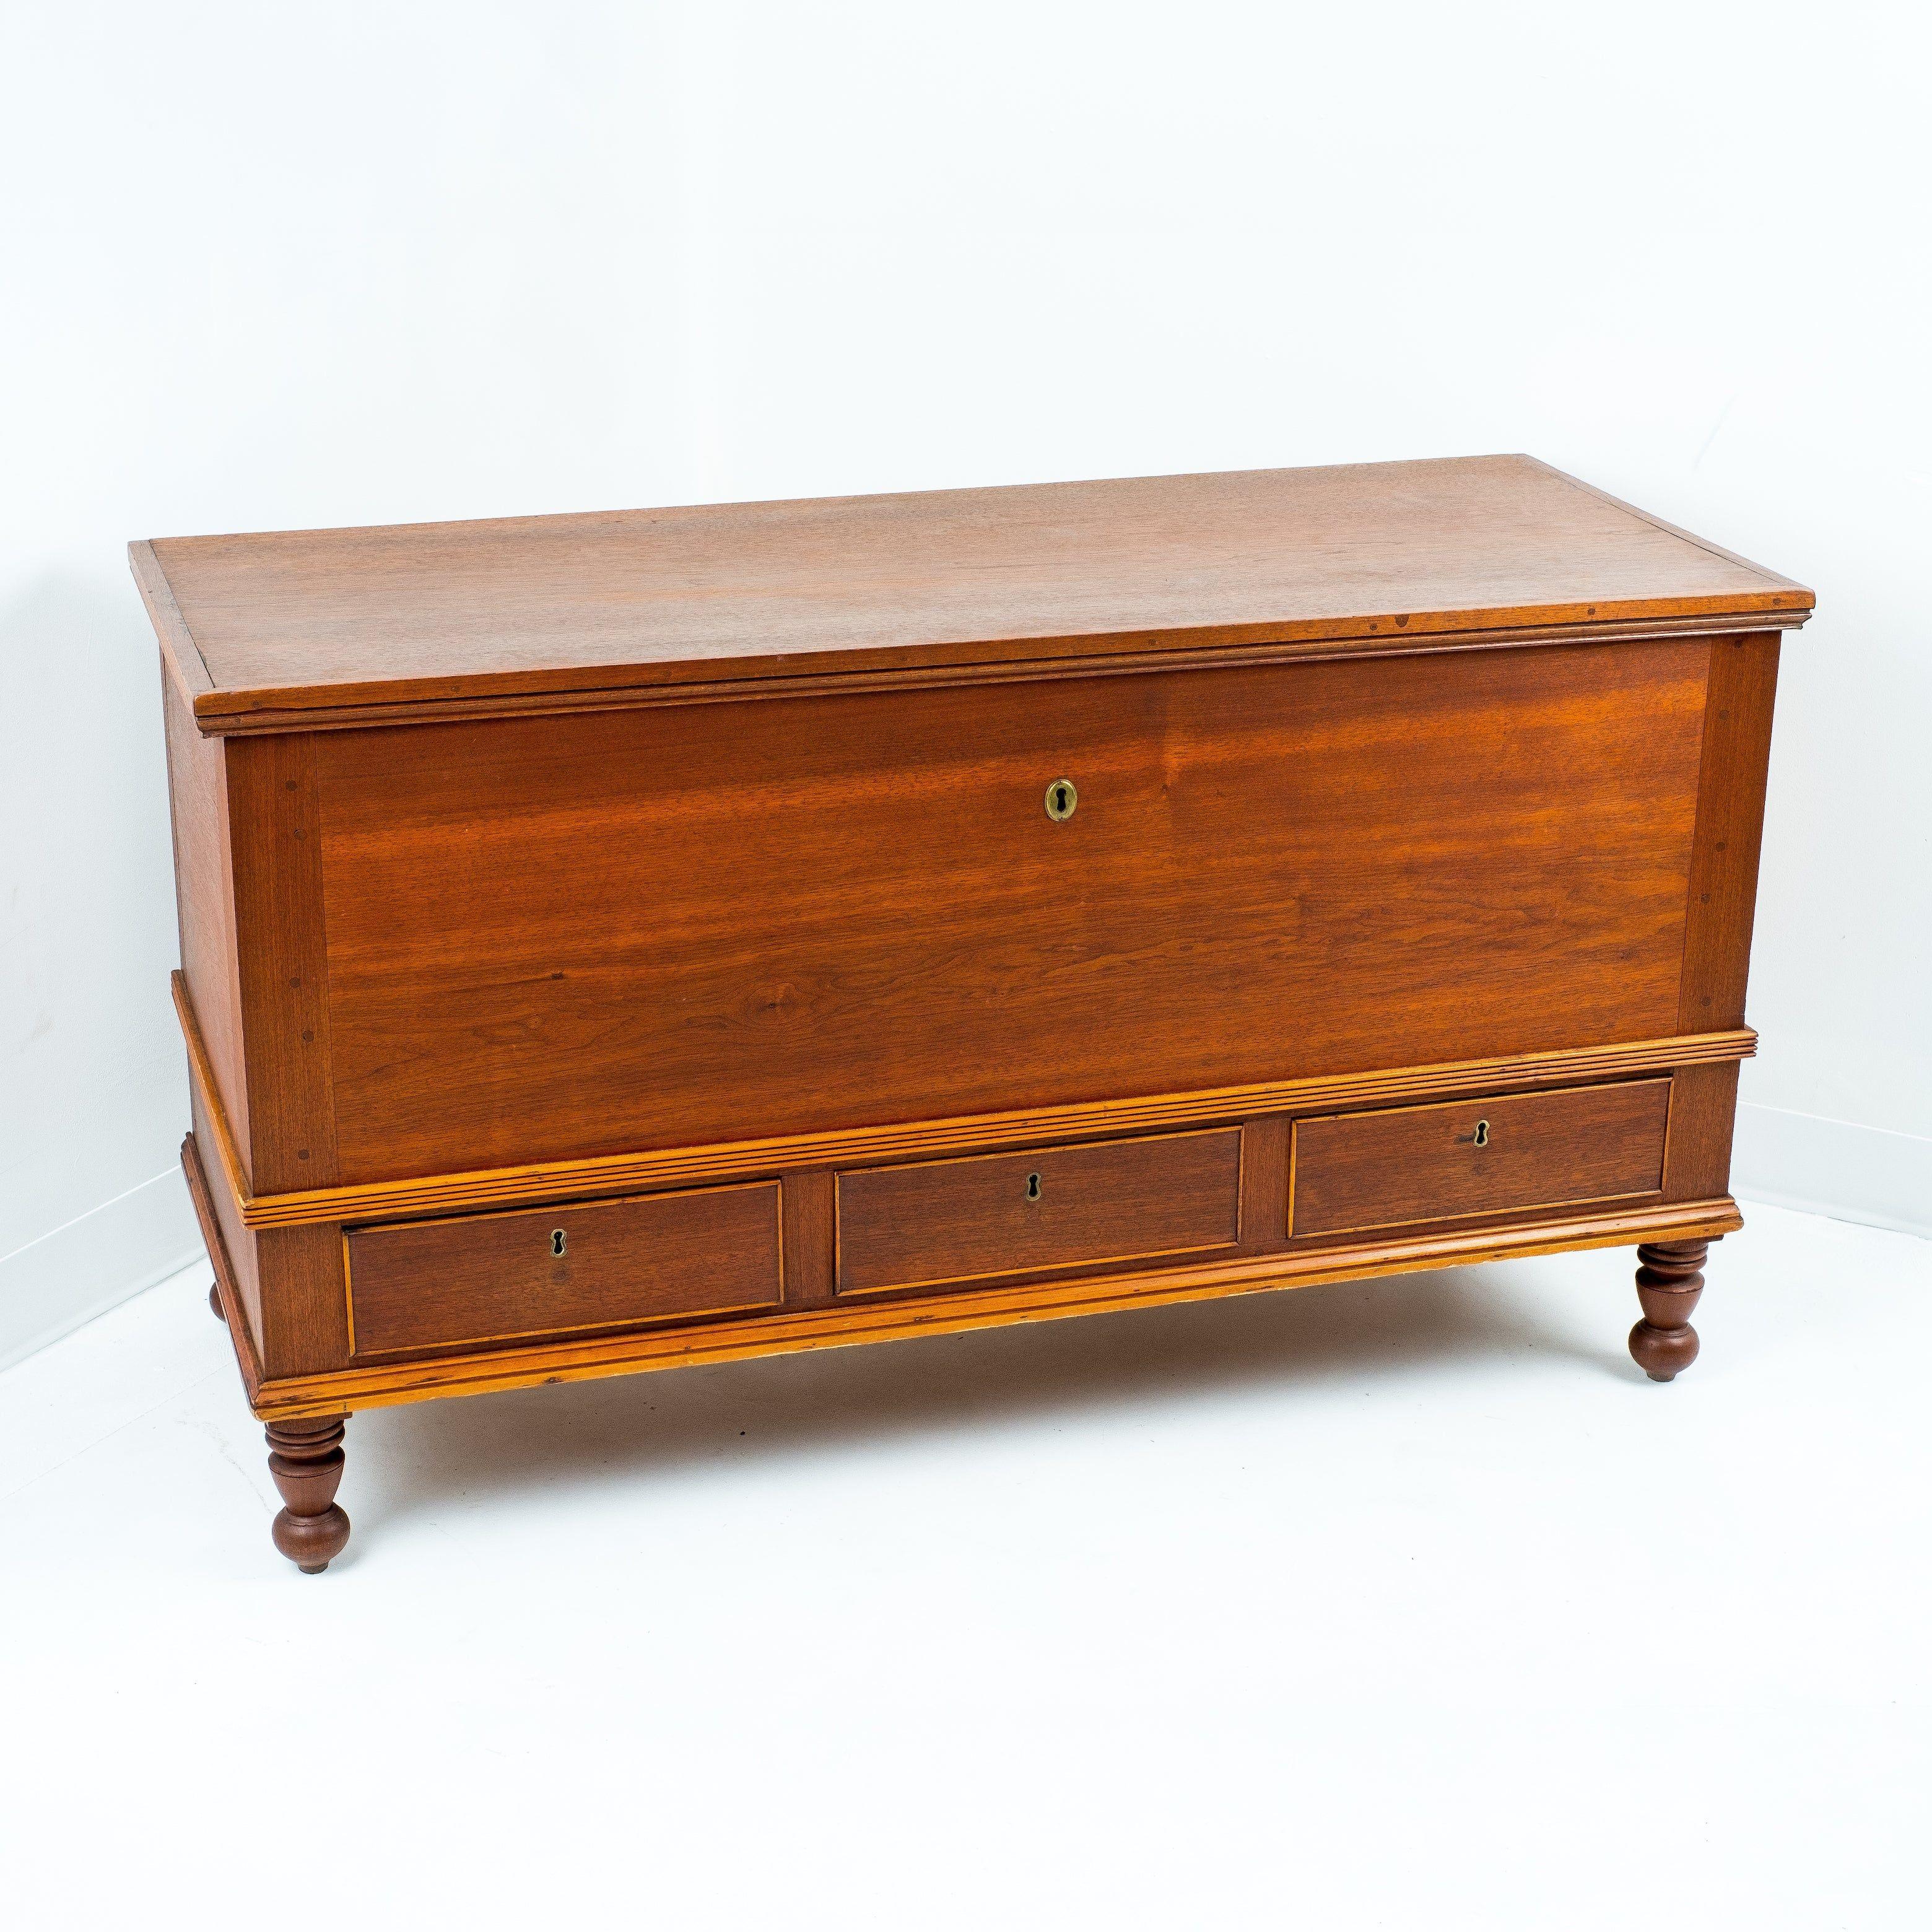 Mid-19th Century Delaware Valley Black Walnut Dower Chest, 1830 For Sale